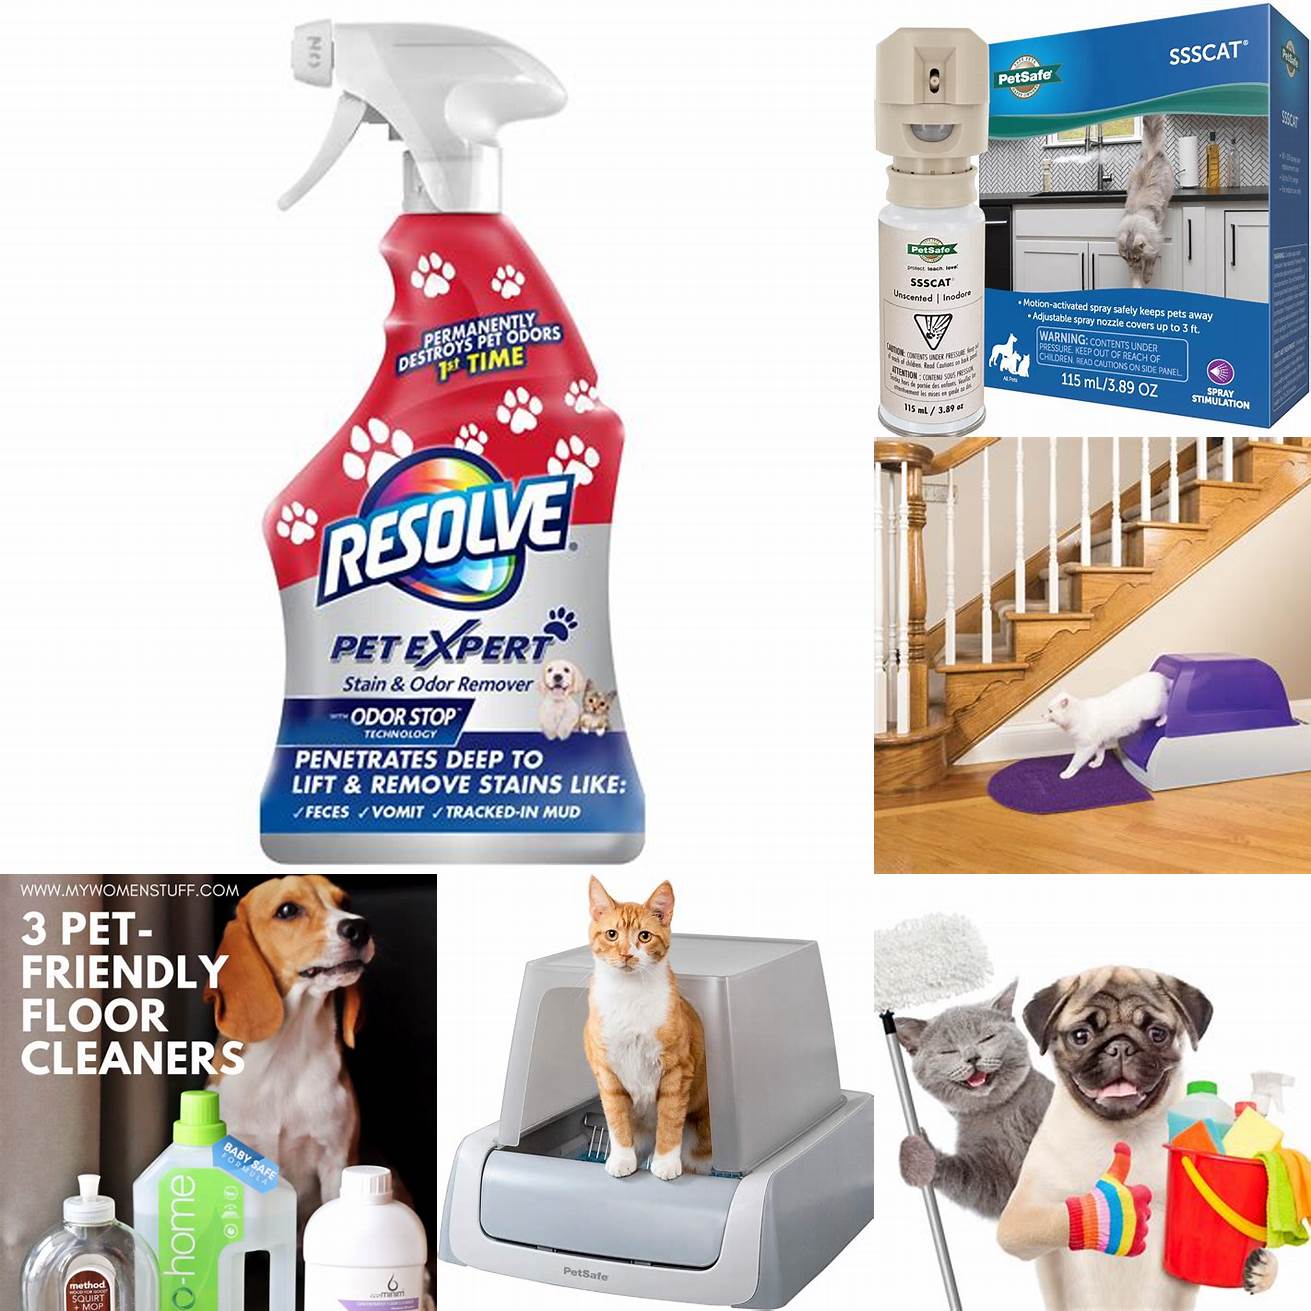 Always use pet-safe products